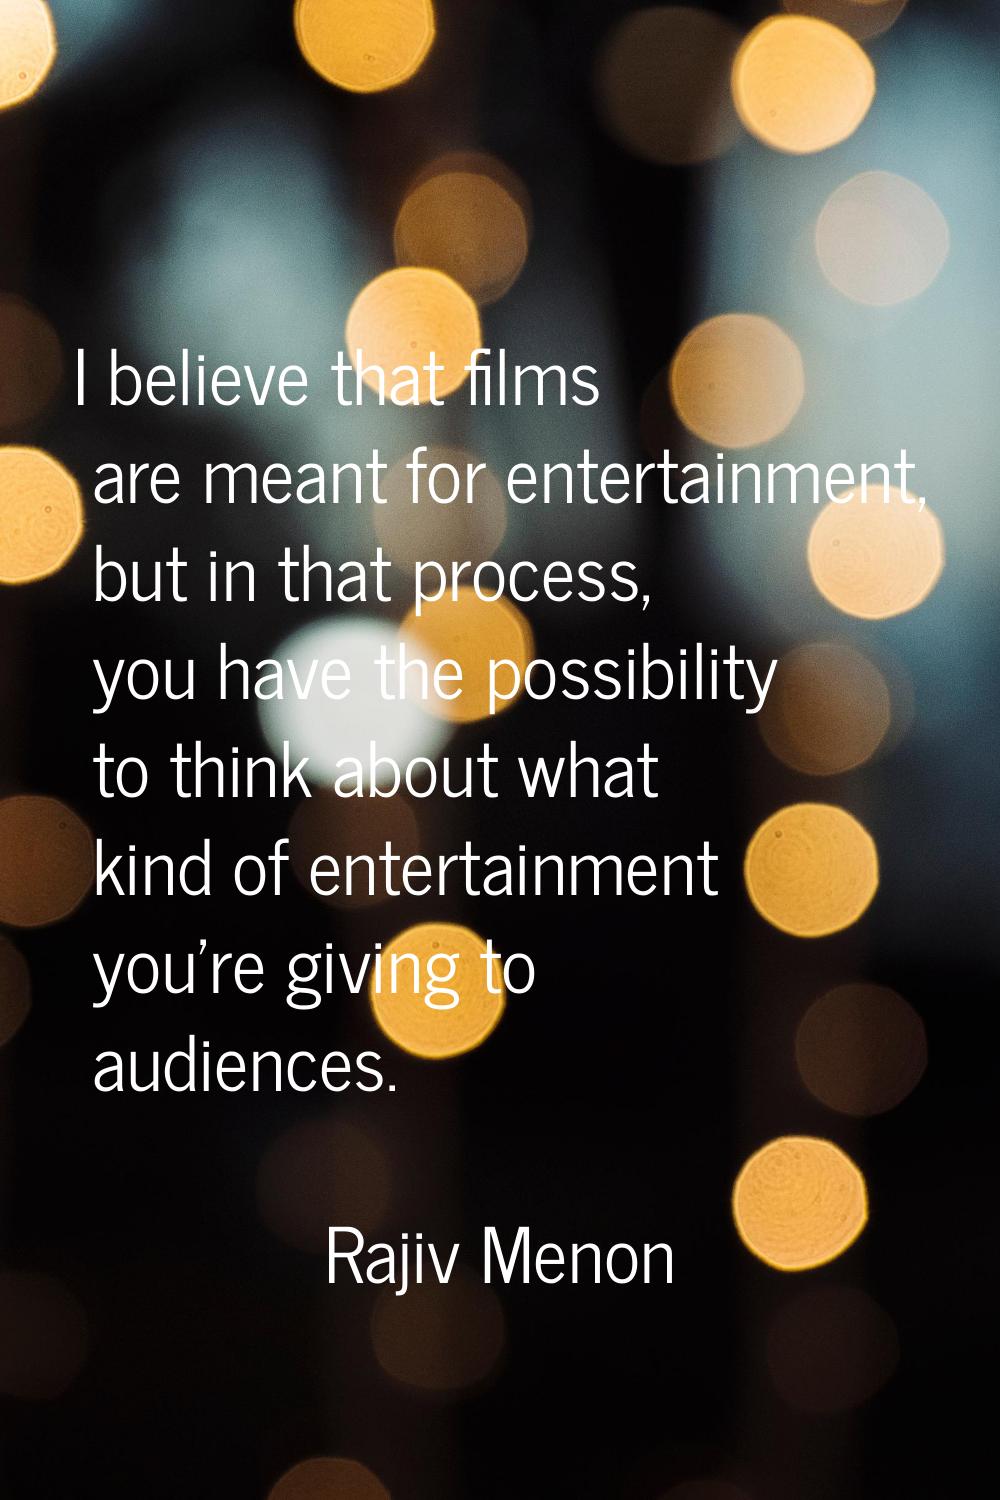 I believe that films are meant for entertainment, but in that process, you have the possibility to 